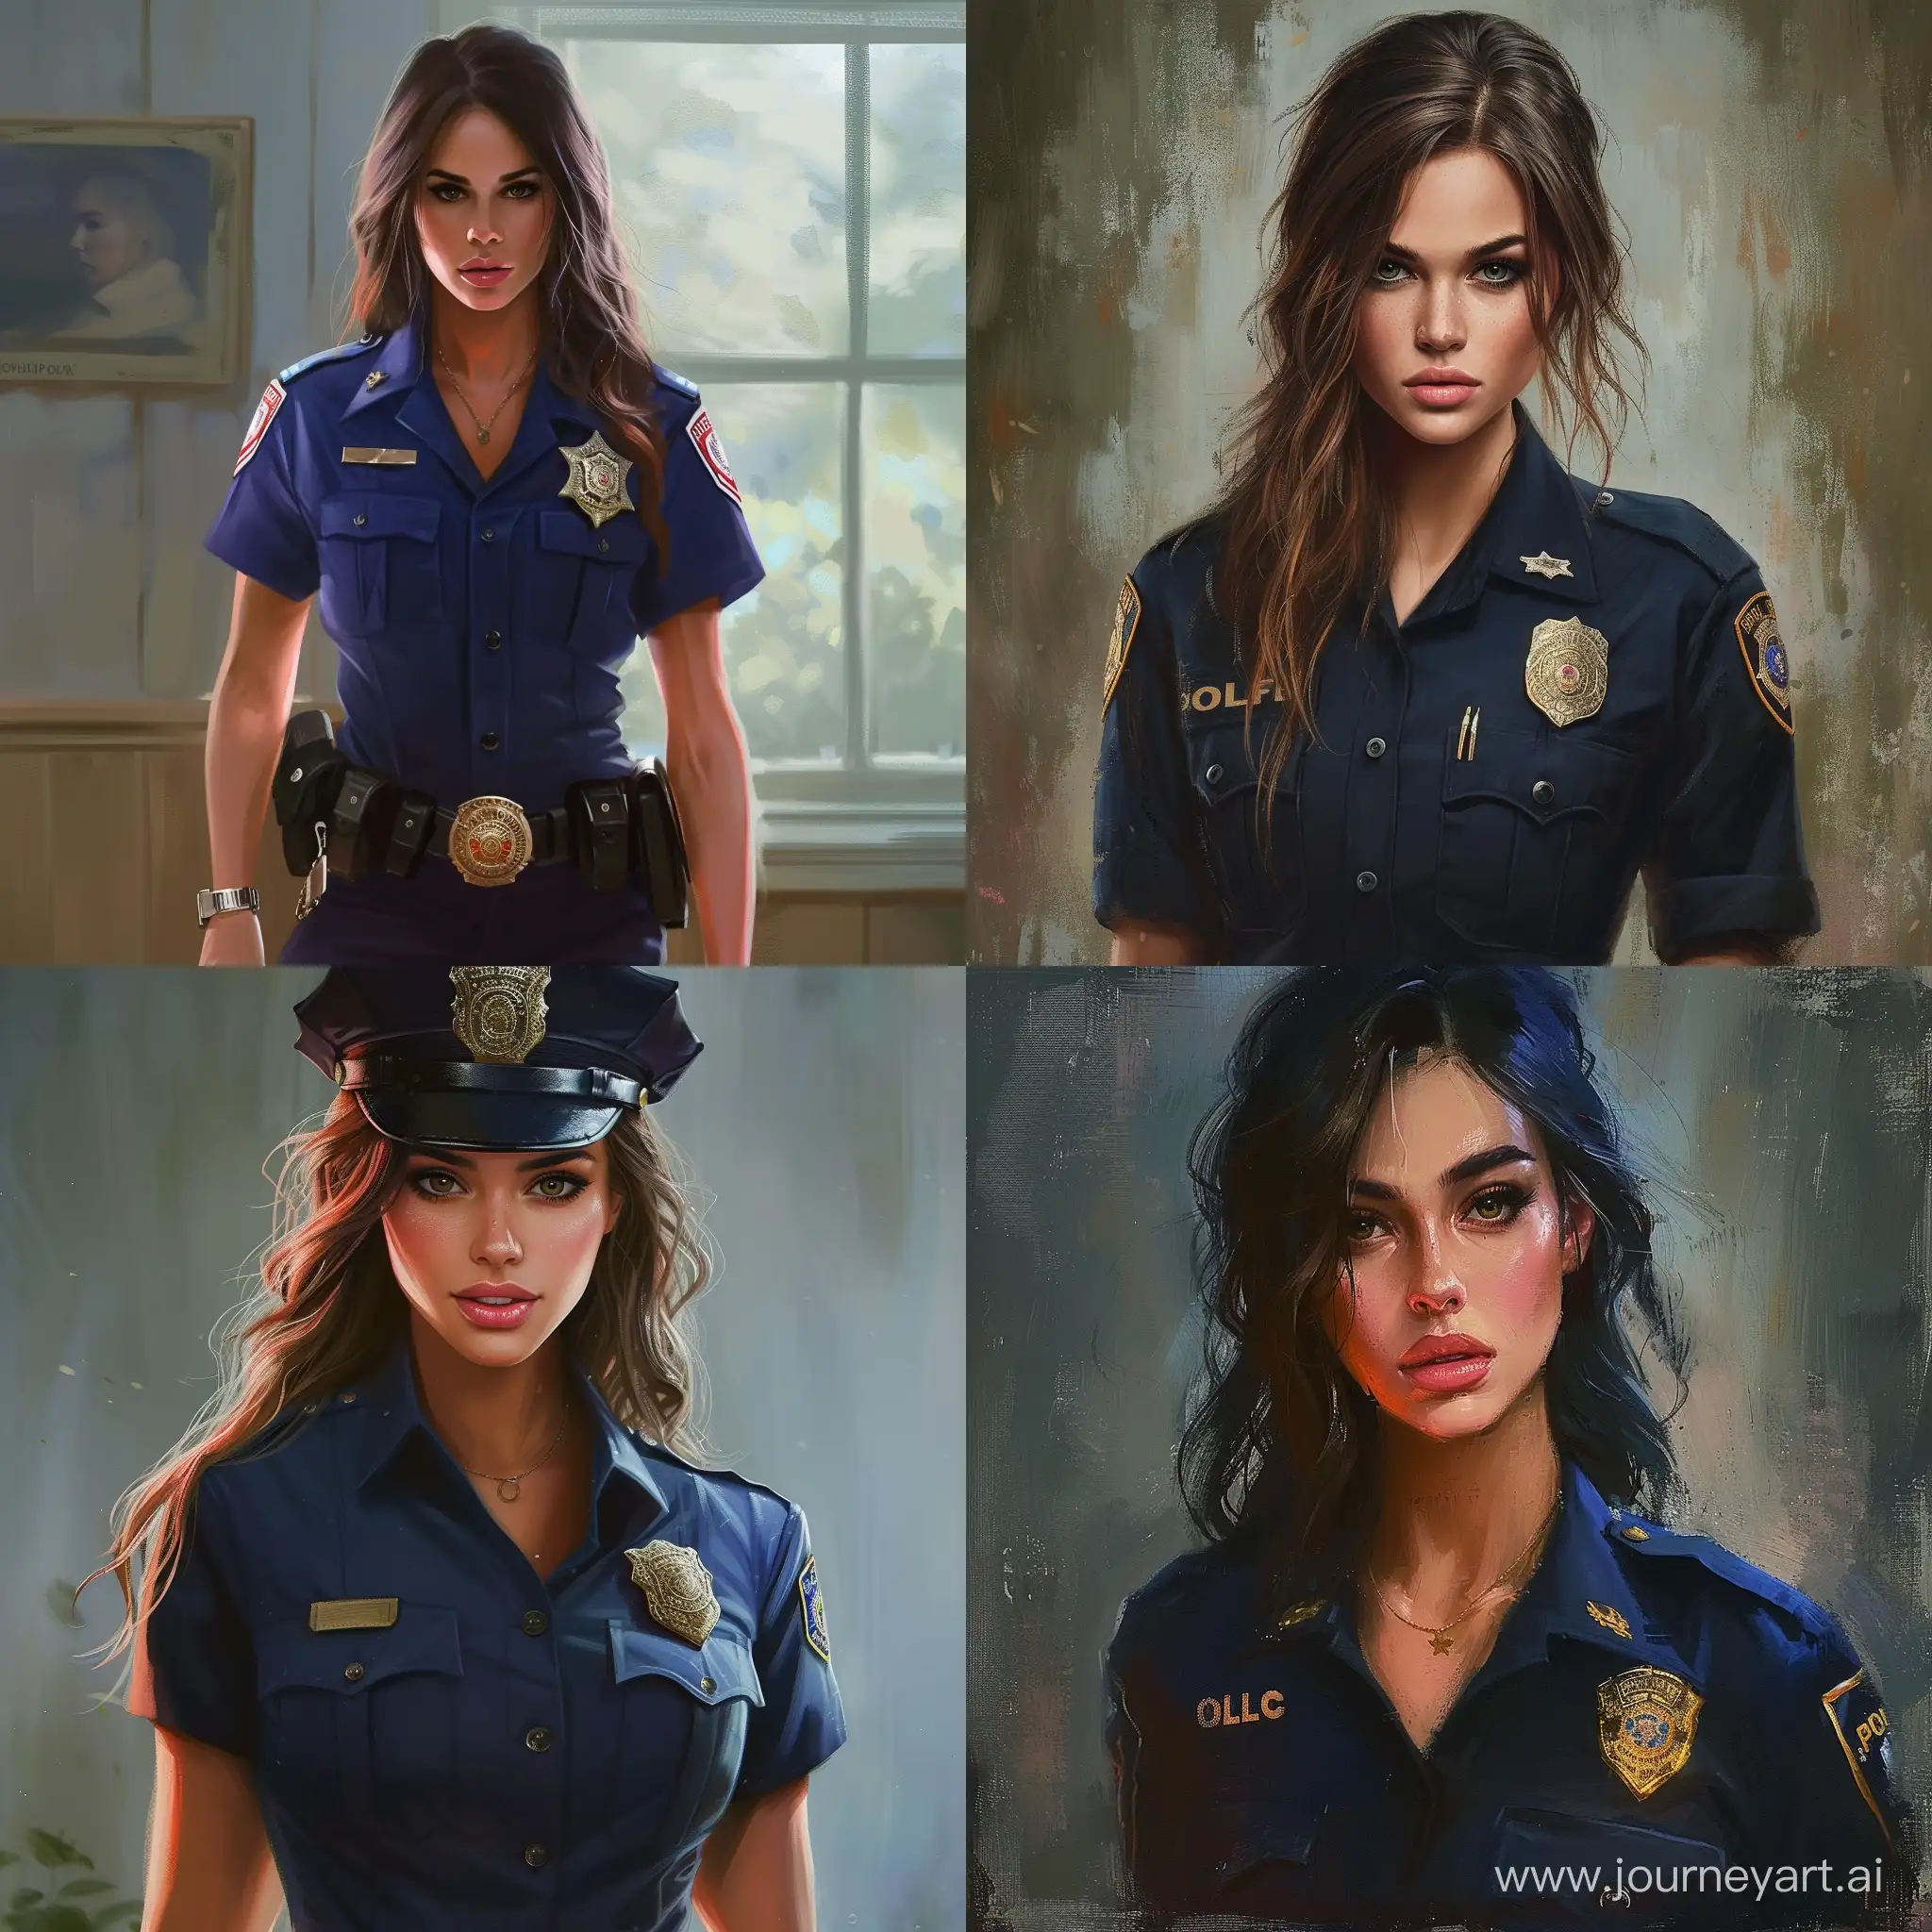 Young-Policewoman-Portrayed-in-Striking-Artistic-Rendering